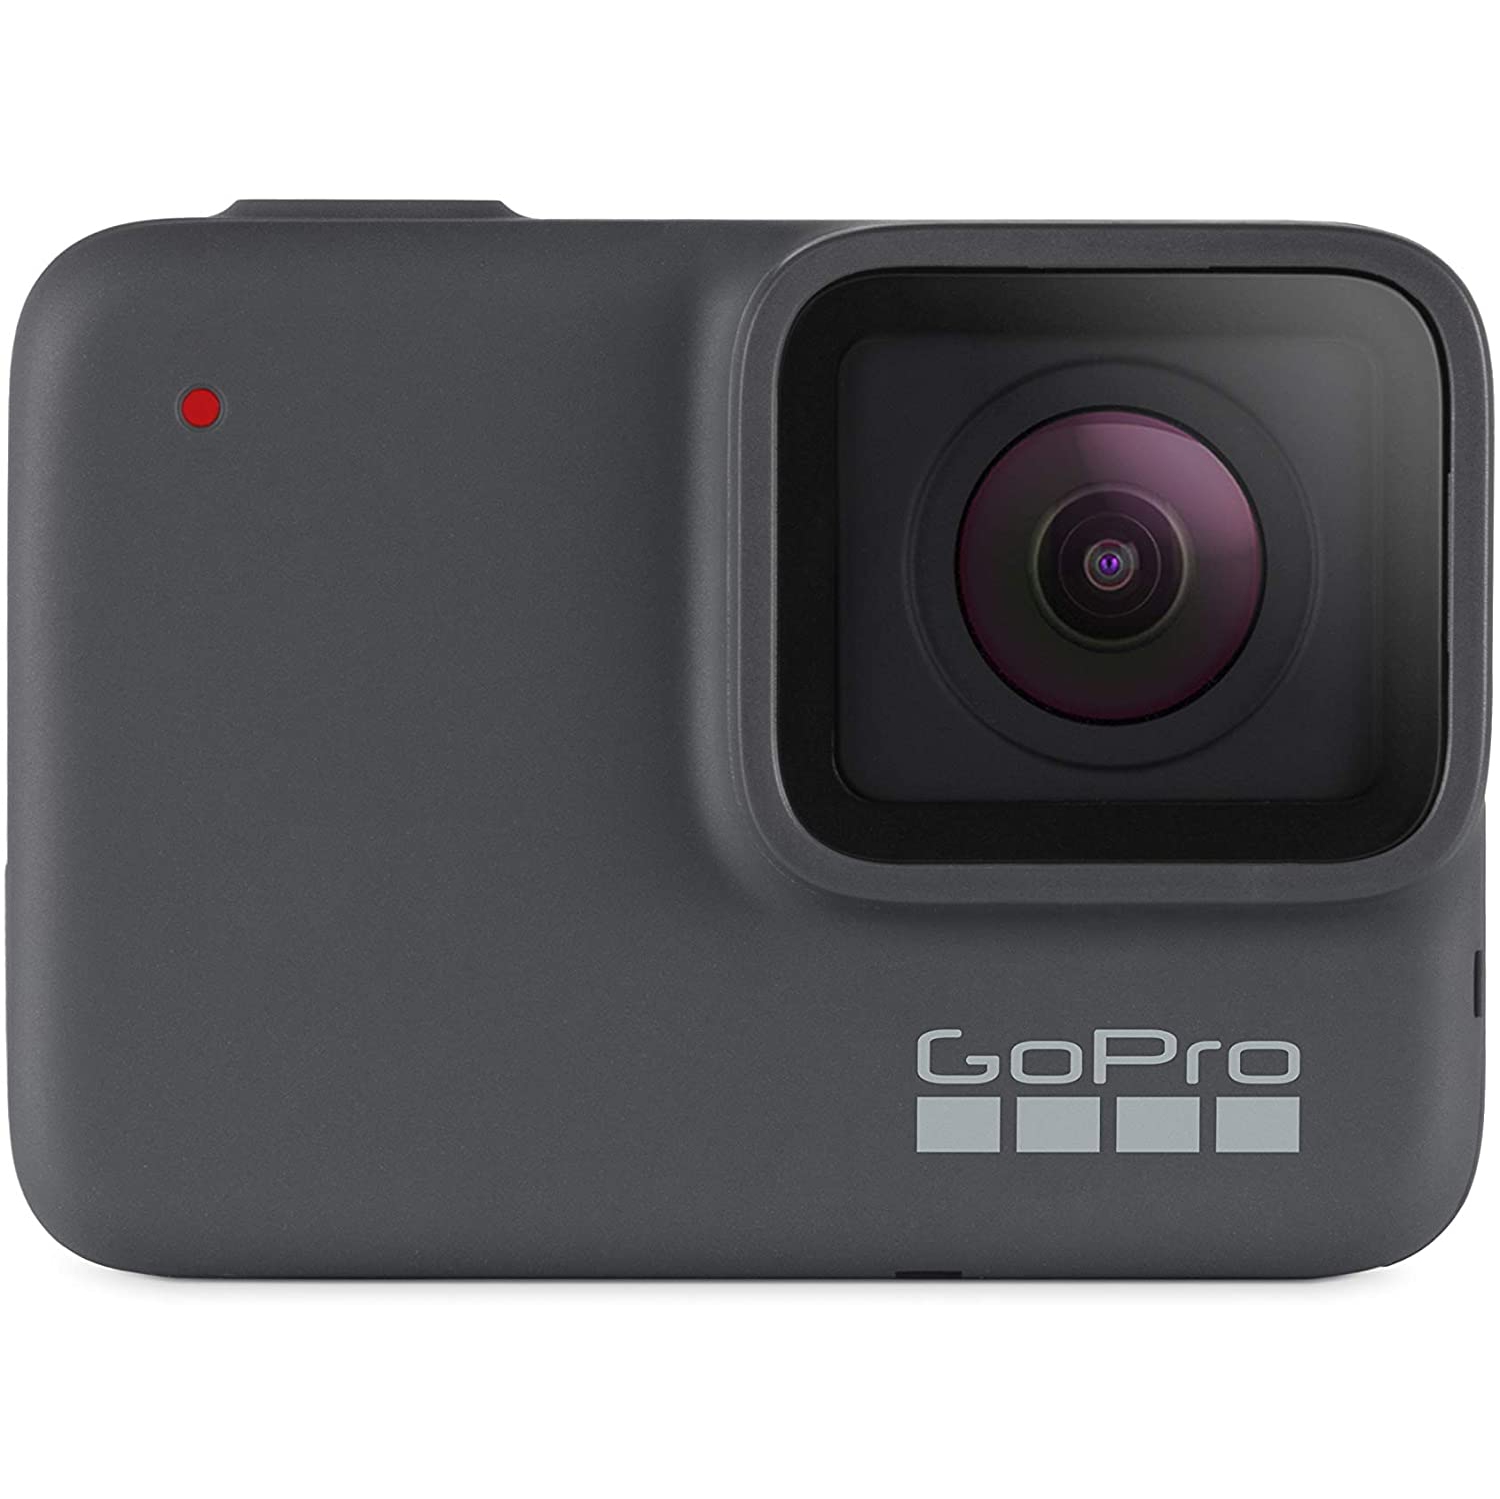 Refurbished (Good) - GoPro HERO7 Silver Waterproof Digital Action Camera with Touch Screen 4K HD Video 12MP Photos